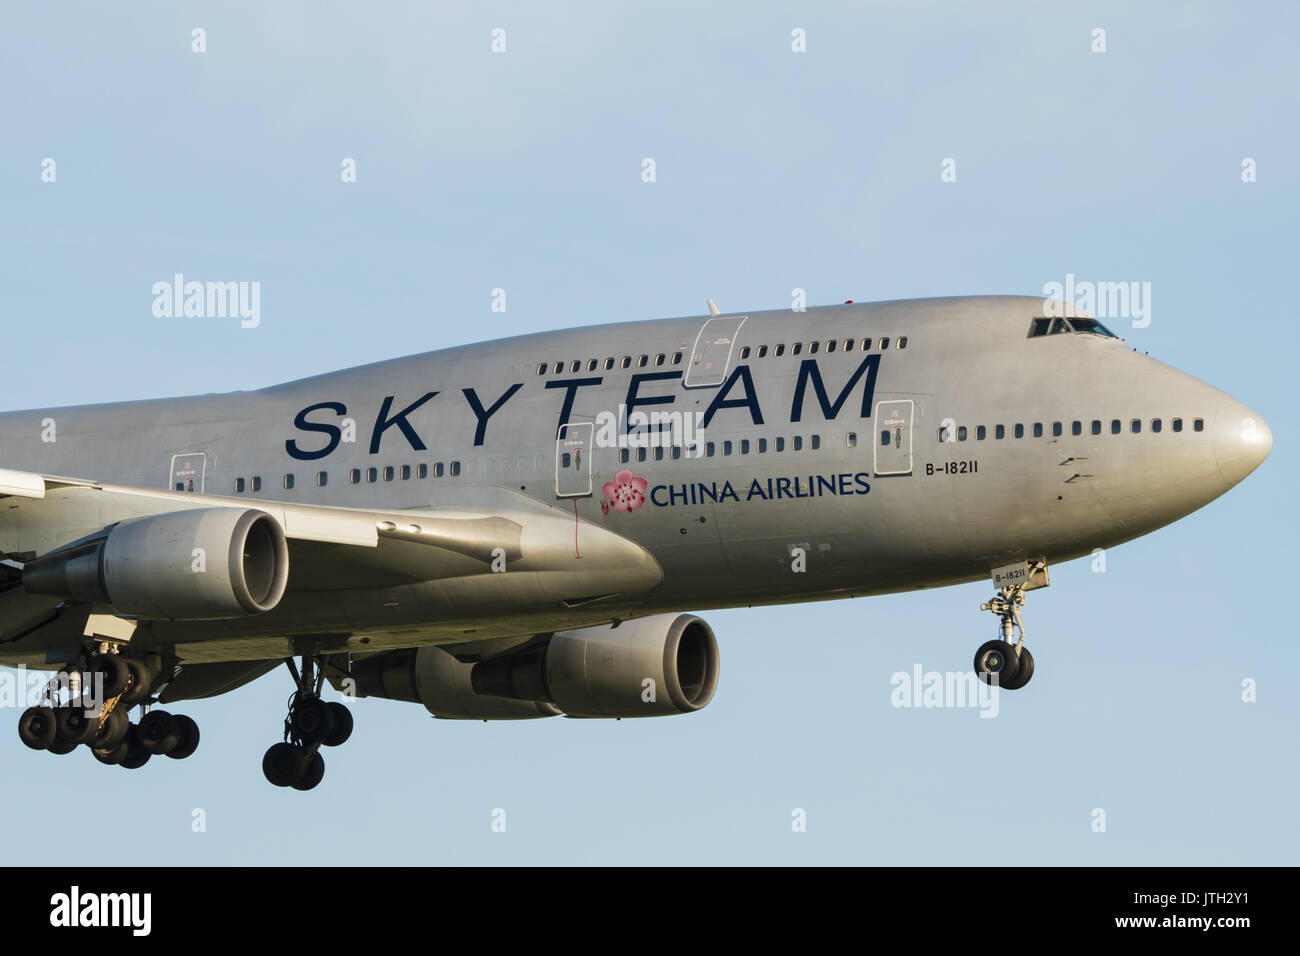 Richmond, British Columbia, Canada. 10th June, 2017. A China Airlines Boeing 747-400 (B-18211) painted in special ''SkyTeam'' livery on final approach for landing at Vancouver International Airport. The SkyTeam alliance has twenty member airlines. Credit: Bayne Stanley/ZUMA Wire/Alamy Live News Stock Photo